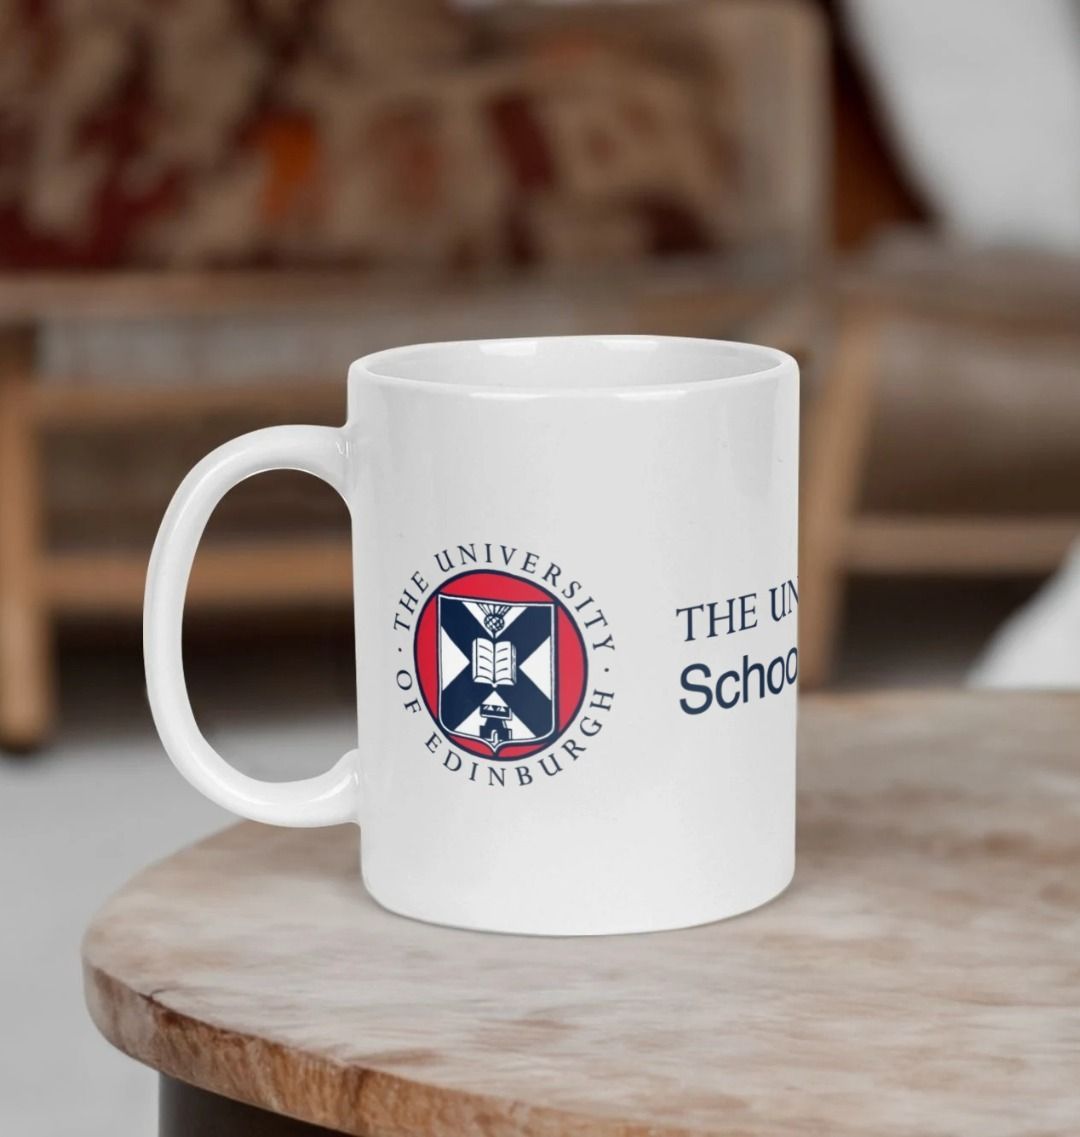 White School of Biological Sciences mug with multi-colour printed University crest and logo